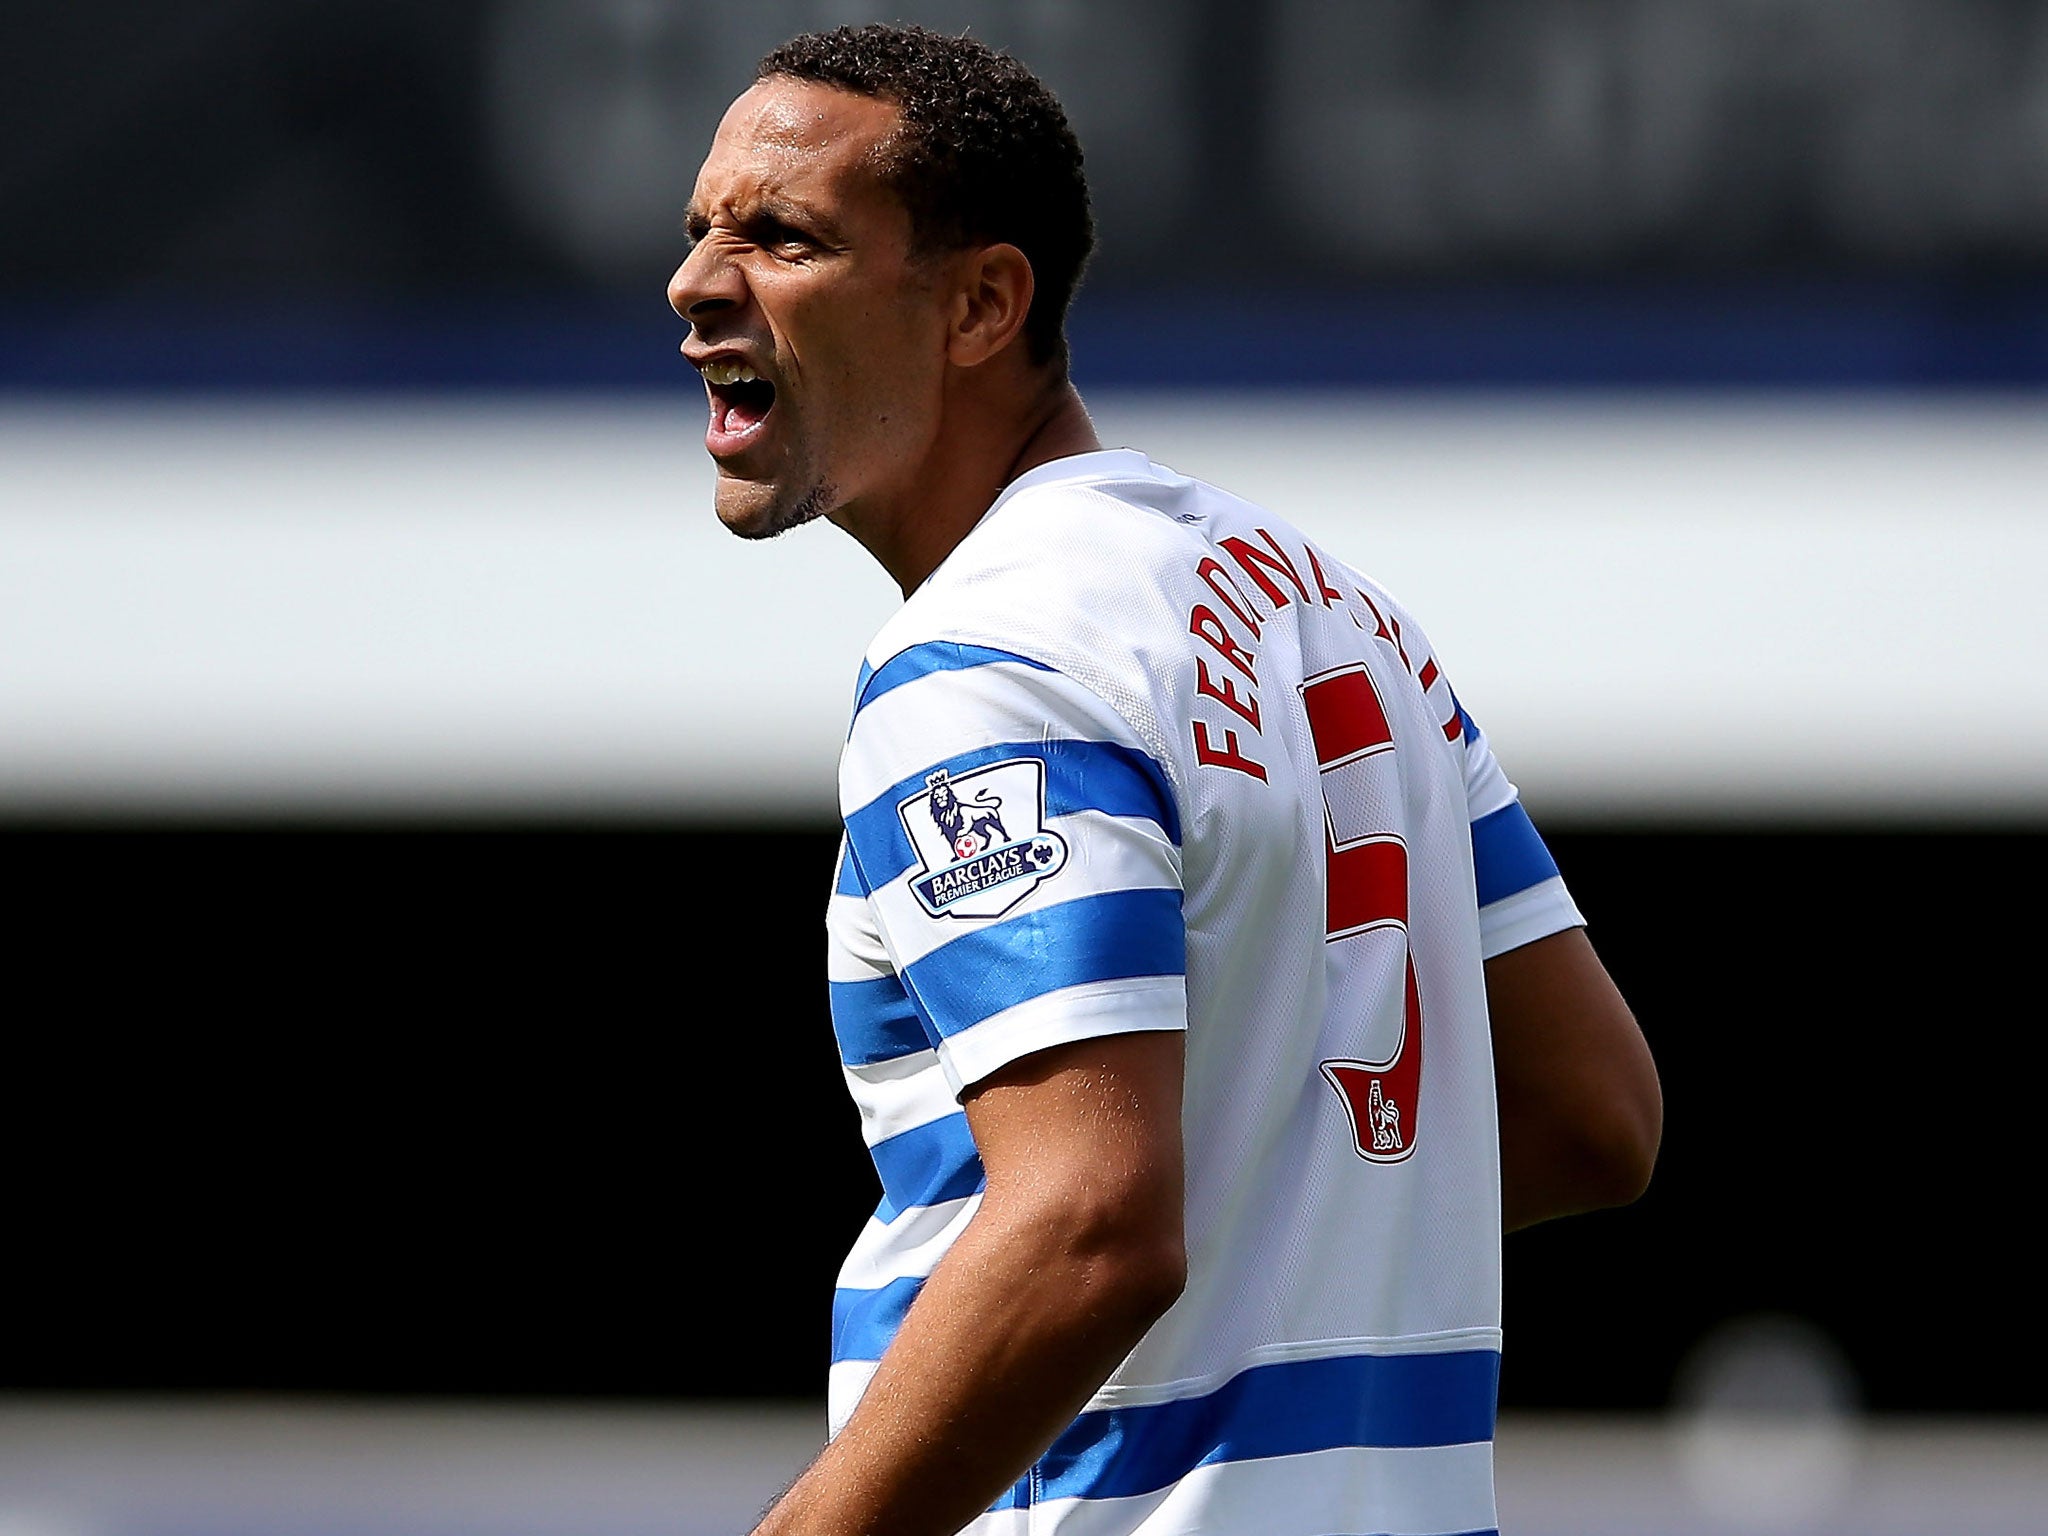 Rio Ferdinand has criticised John Terry over the racism row involving his brother Anton